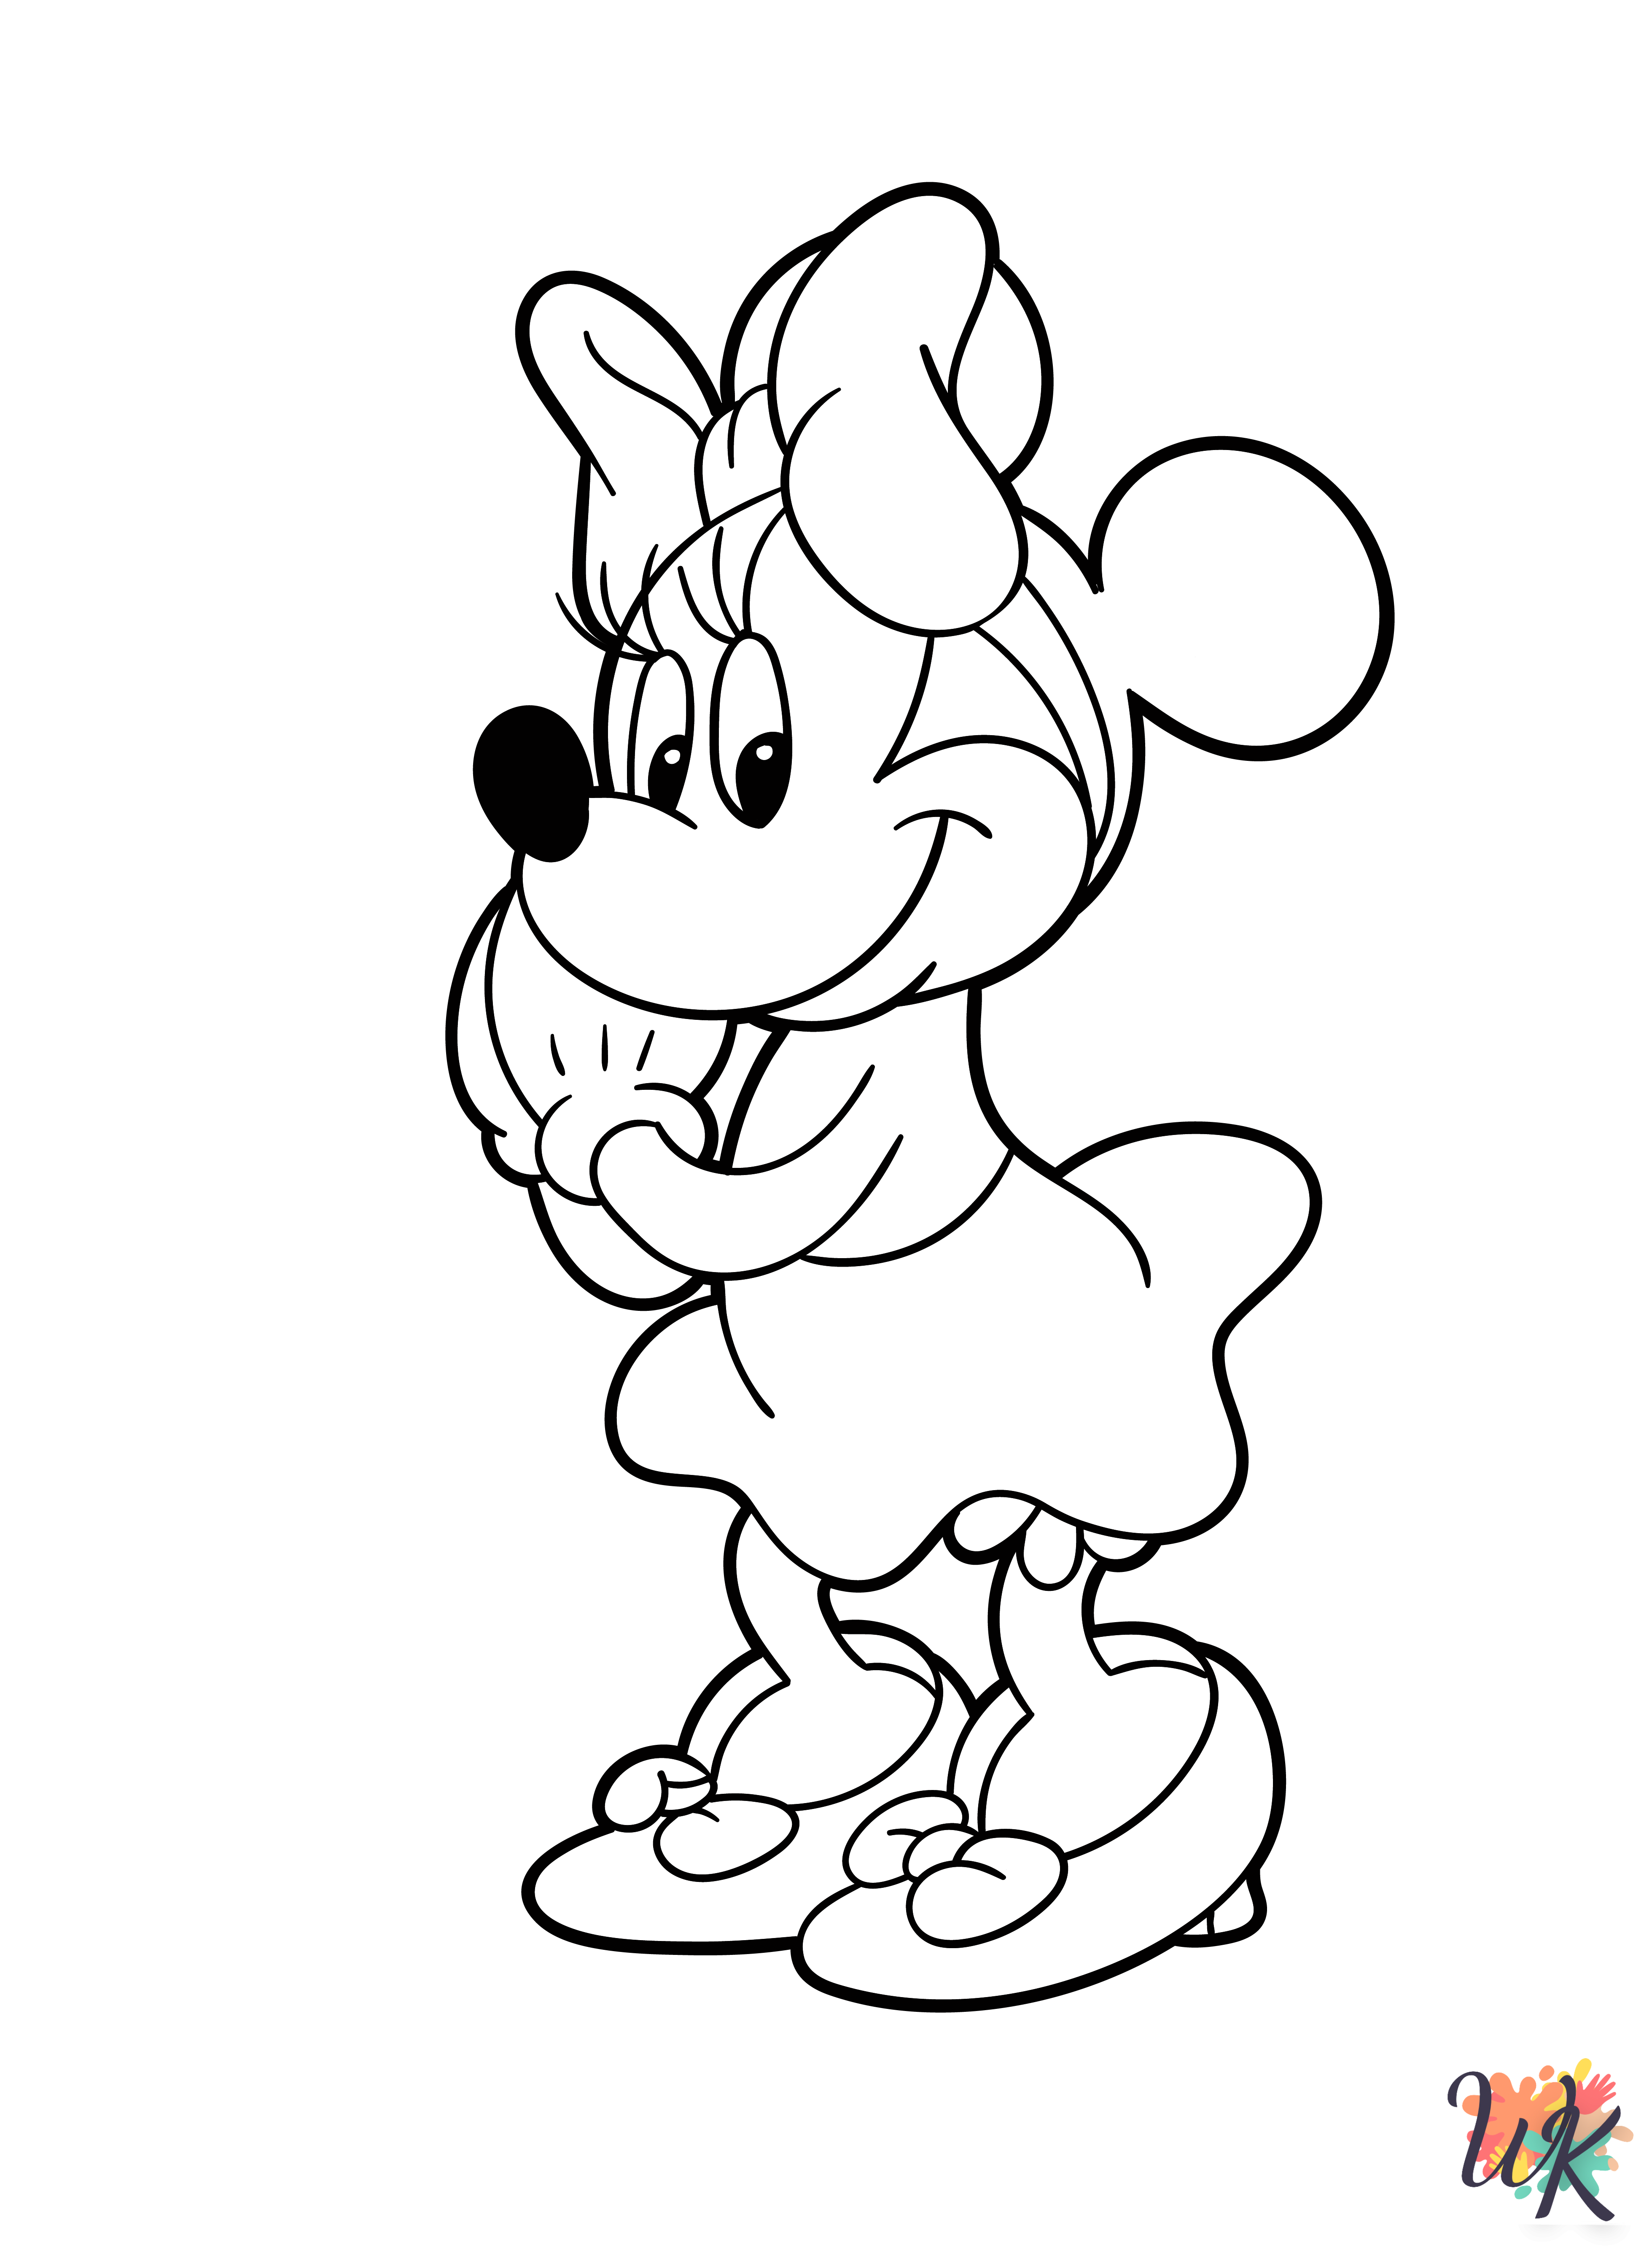 free full size printable Minnie Mouse coloring pages for adults pdf